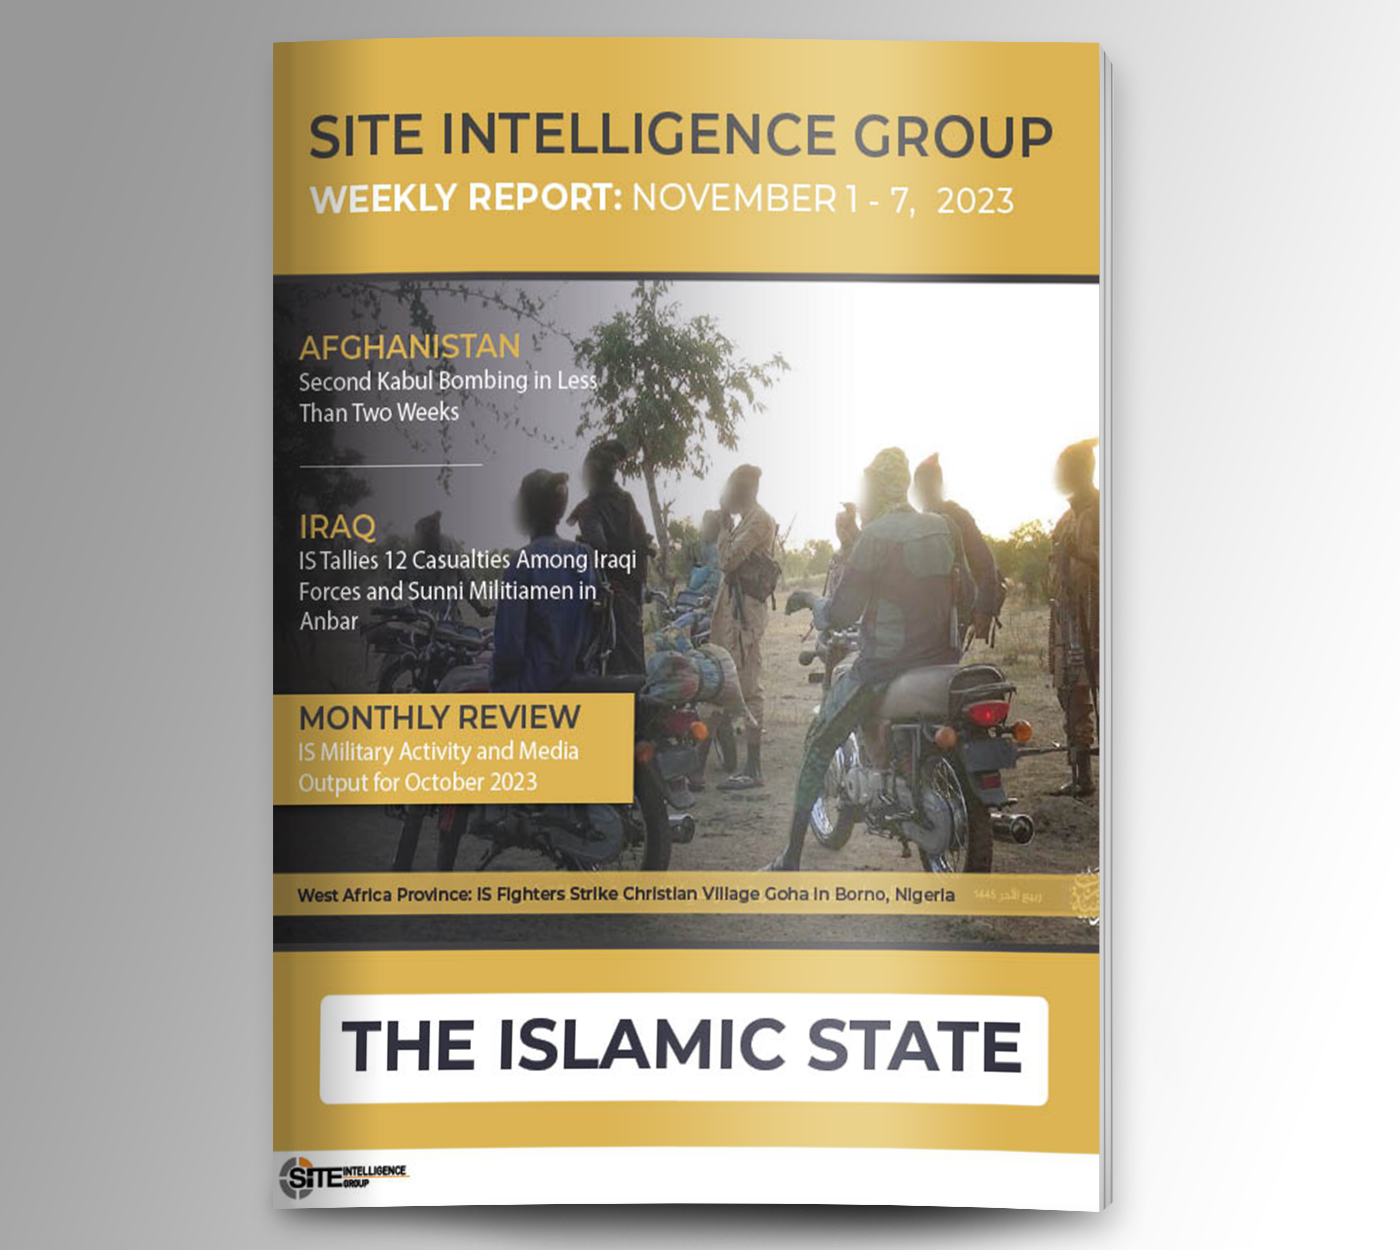 Weekly inSITE on the Islamic State for November 1-7, 2023